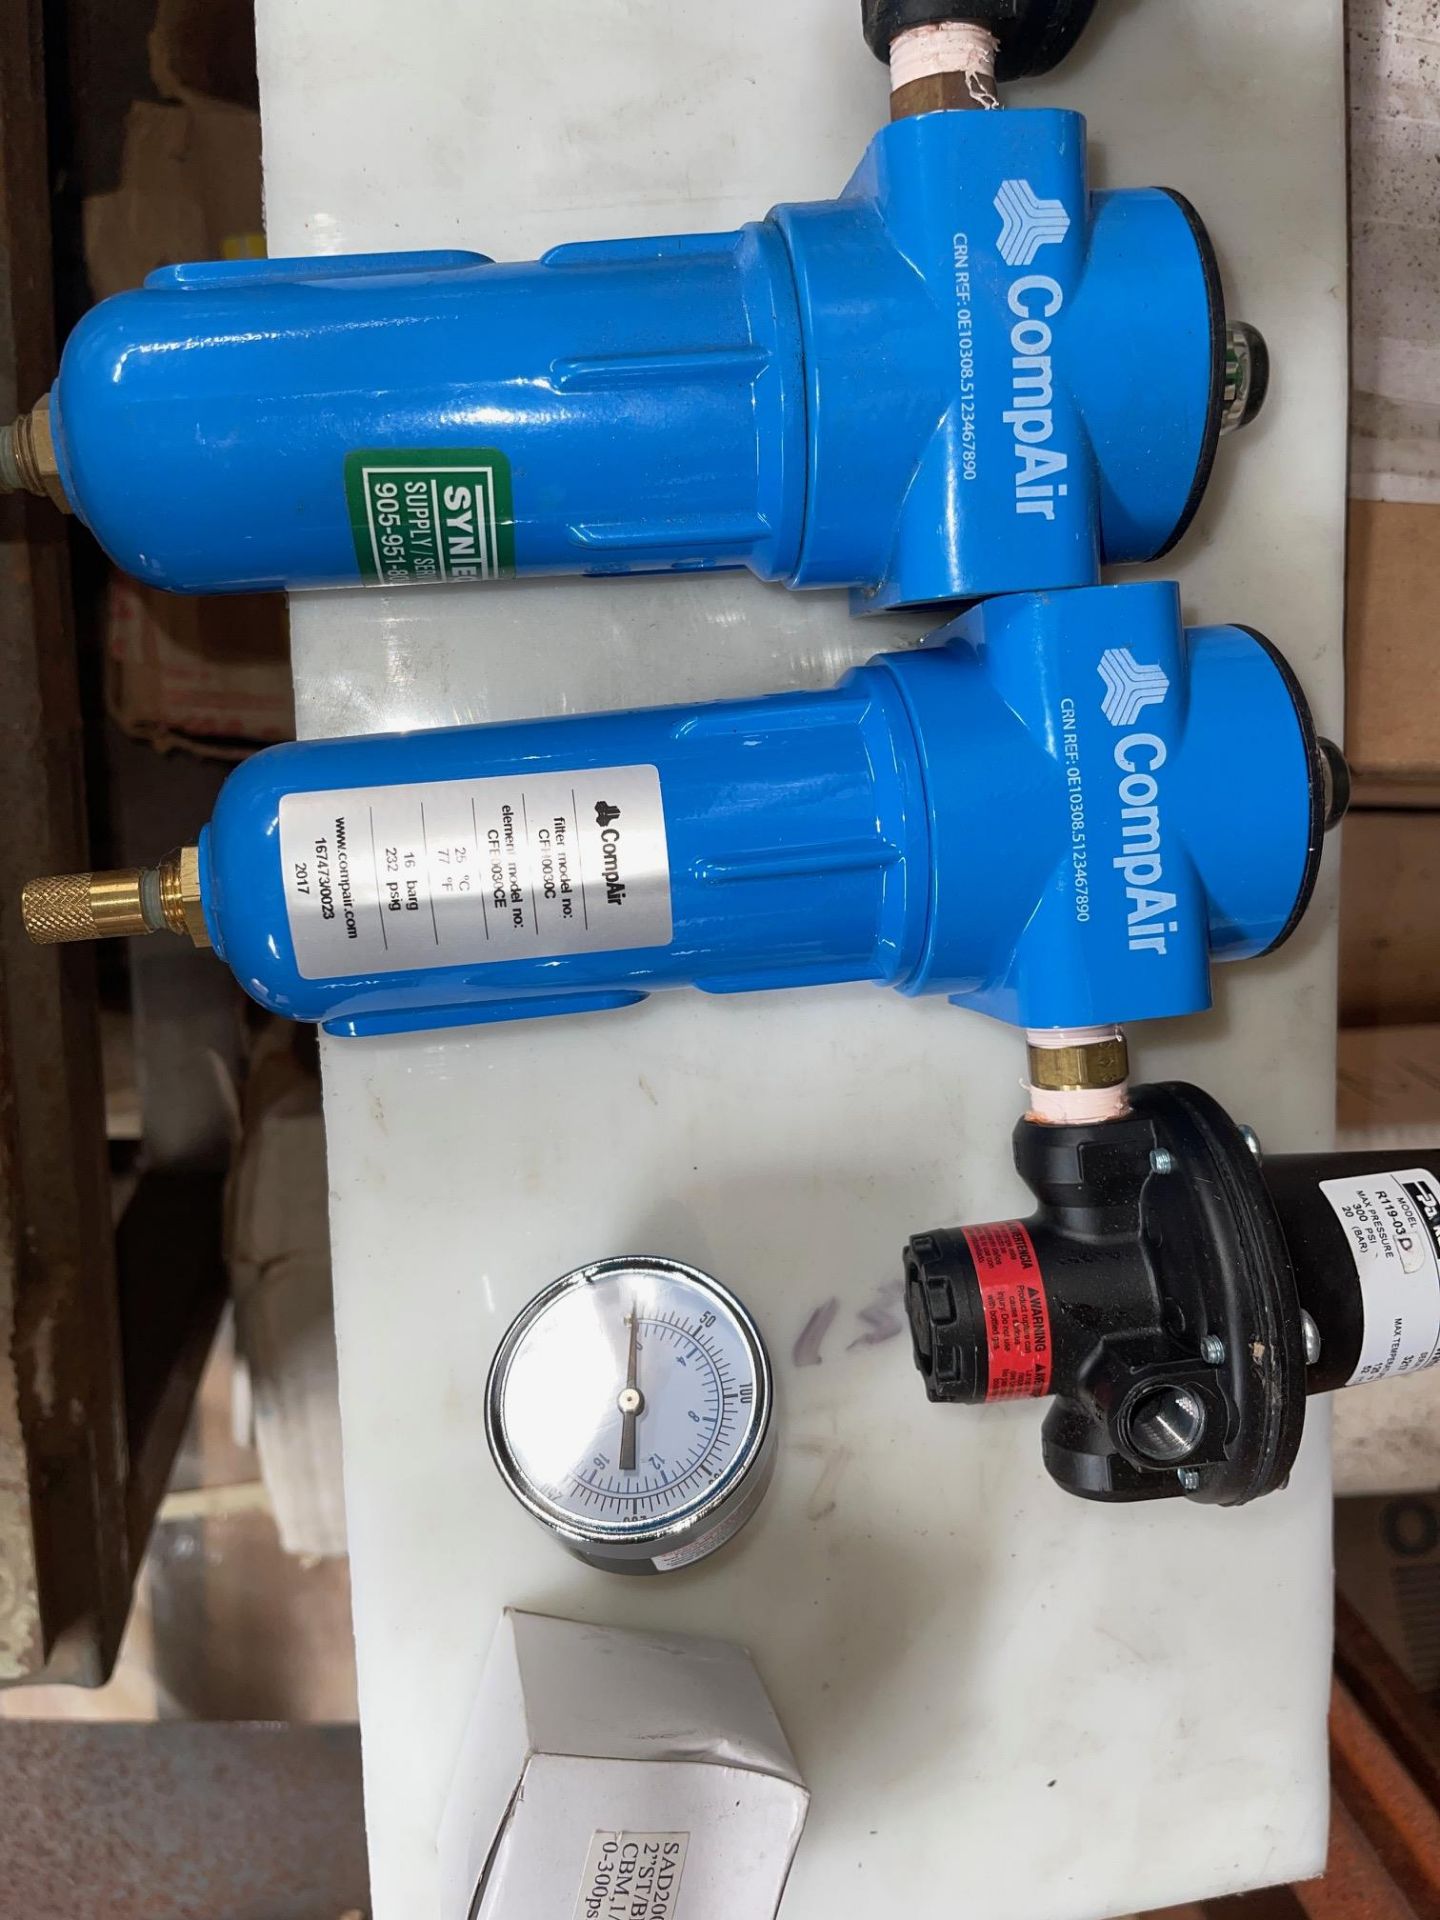 LOT/COMP AIR: AIR WATER SEPARATOR W/PARKER REGULATOR, MAX 300PSI WITH GAUGES(3) SETS - Image 3 of 4